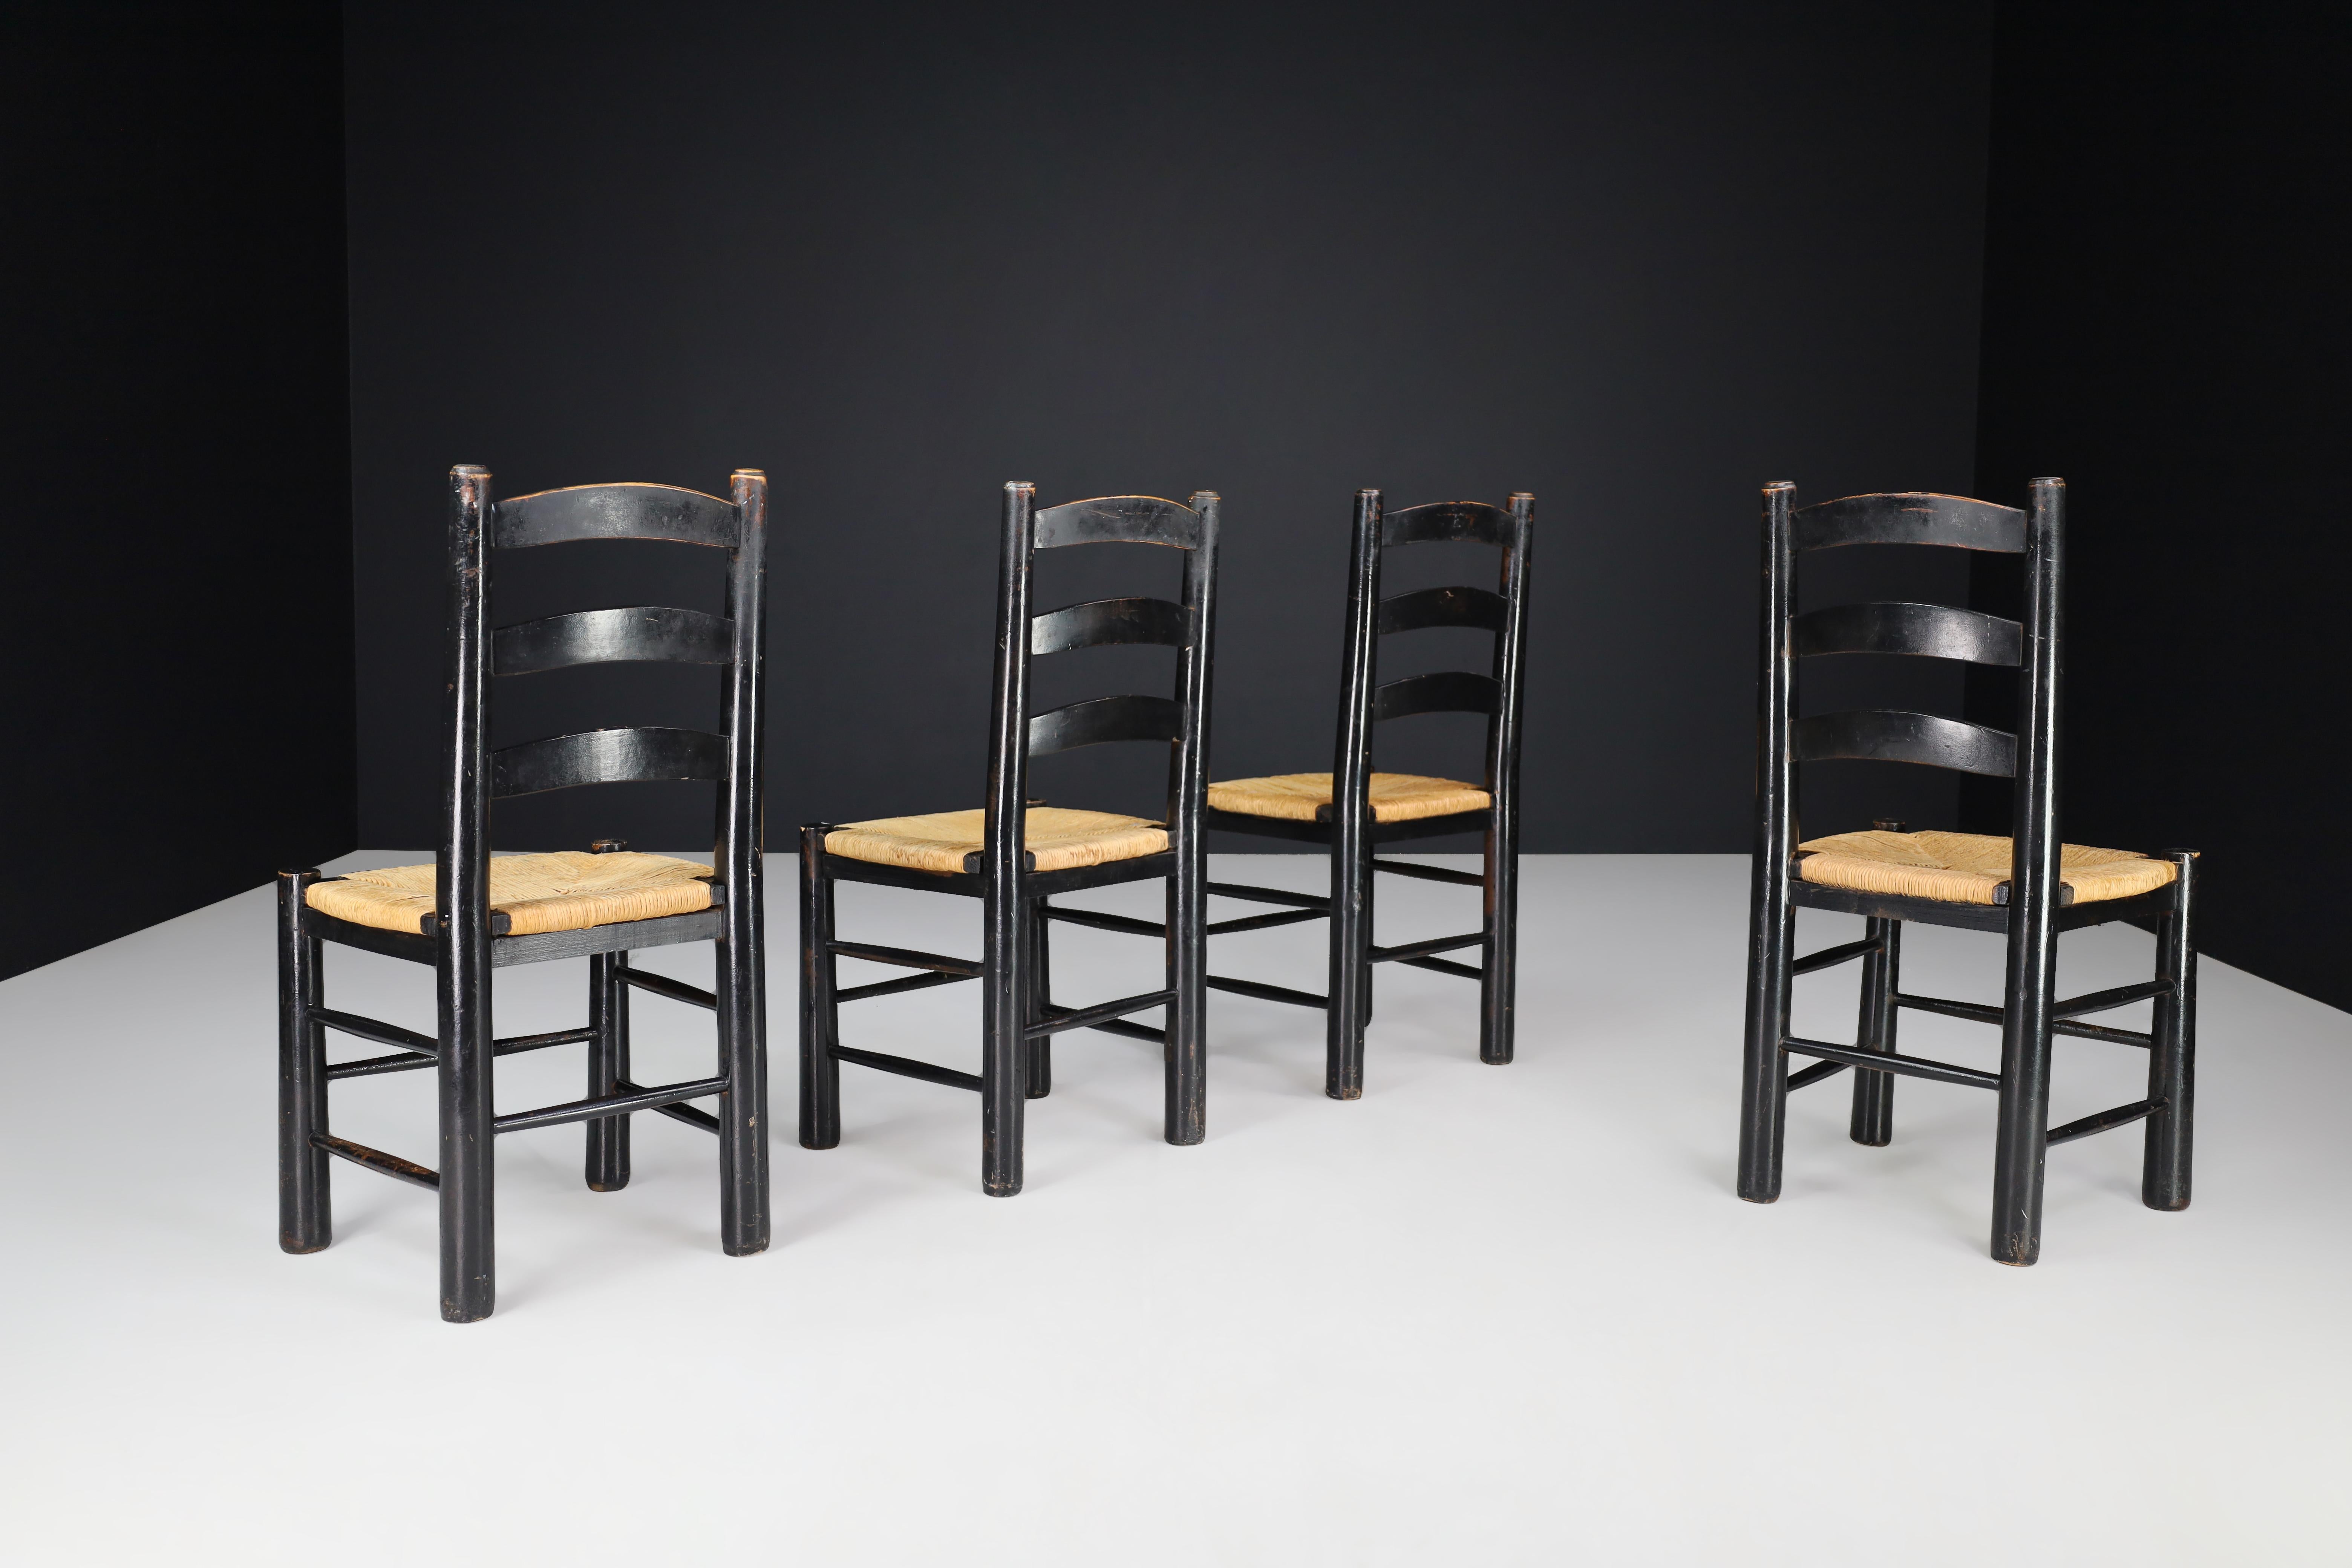 Brutalist Georges Robert Patinated Chairs in Oak and Rush, France, 1950s For Sale